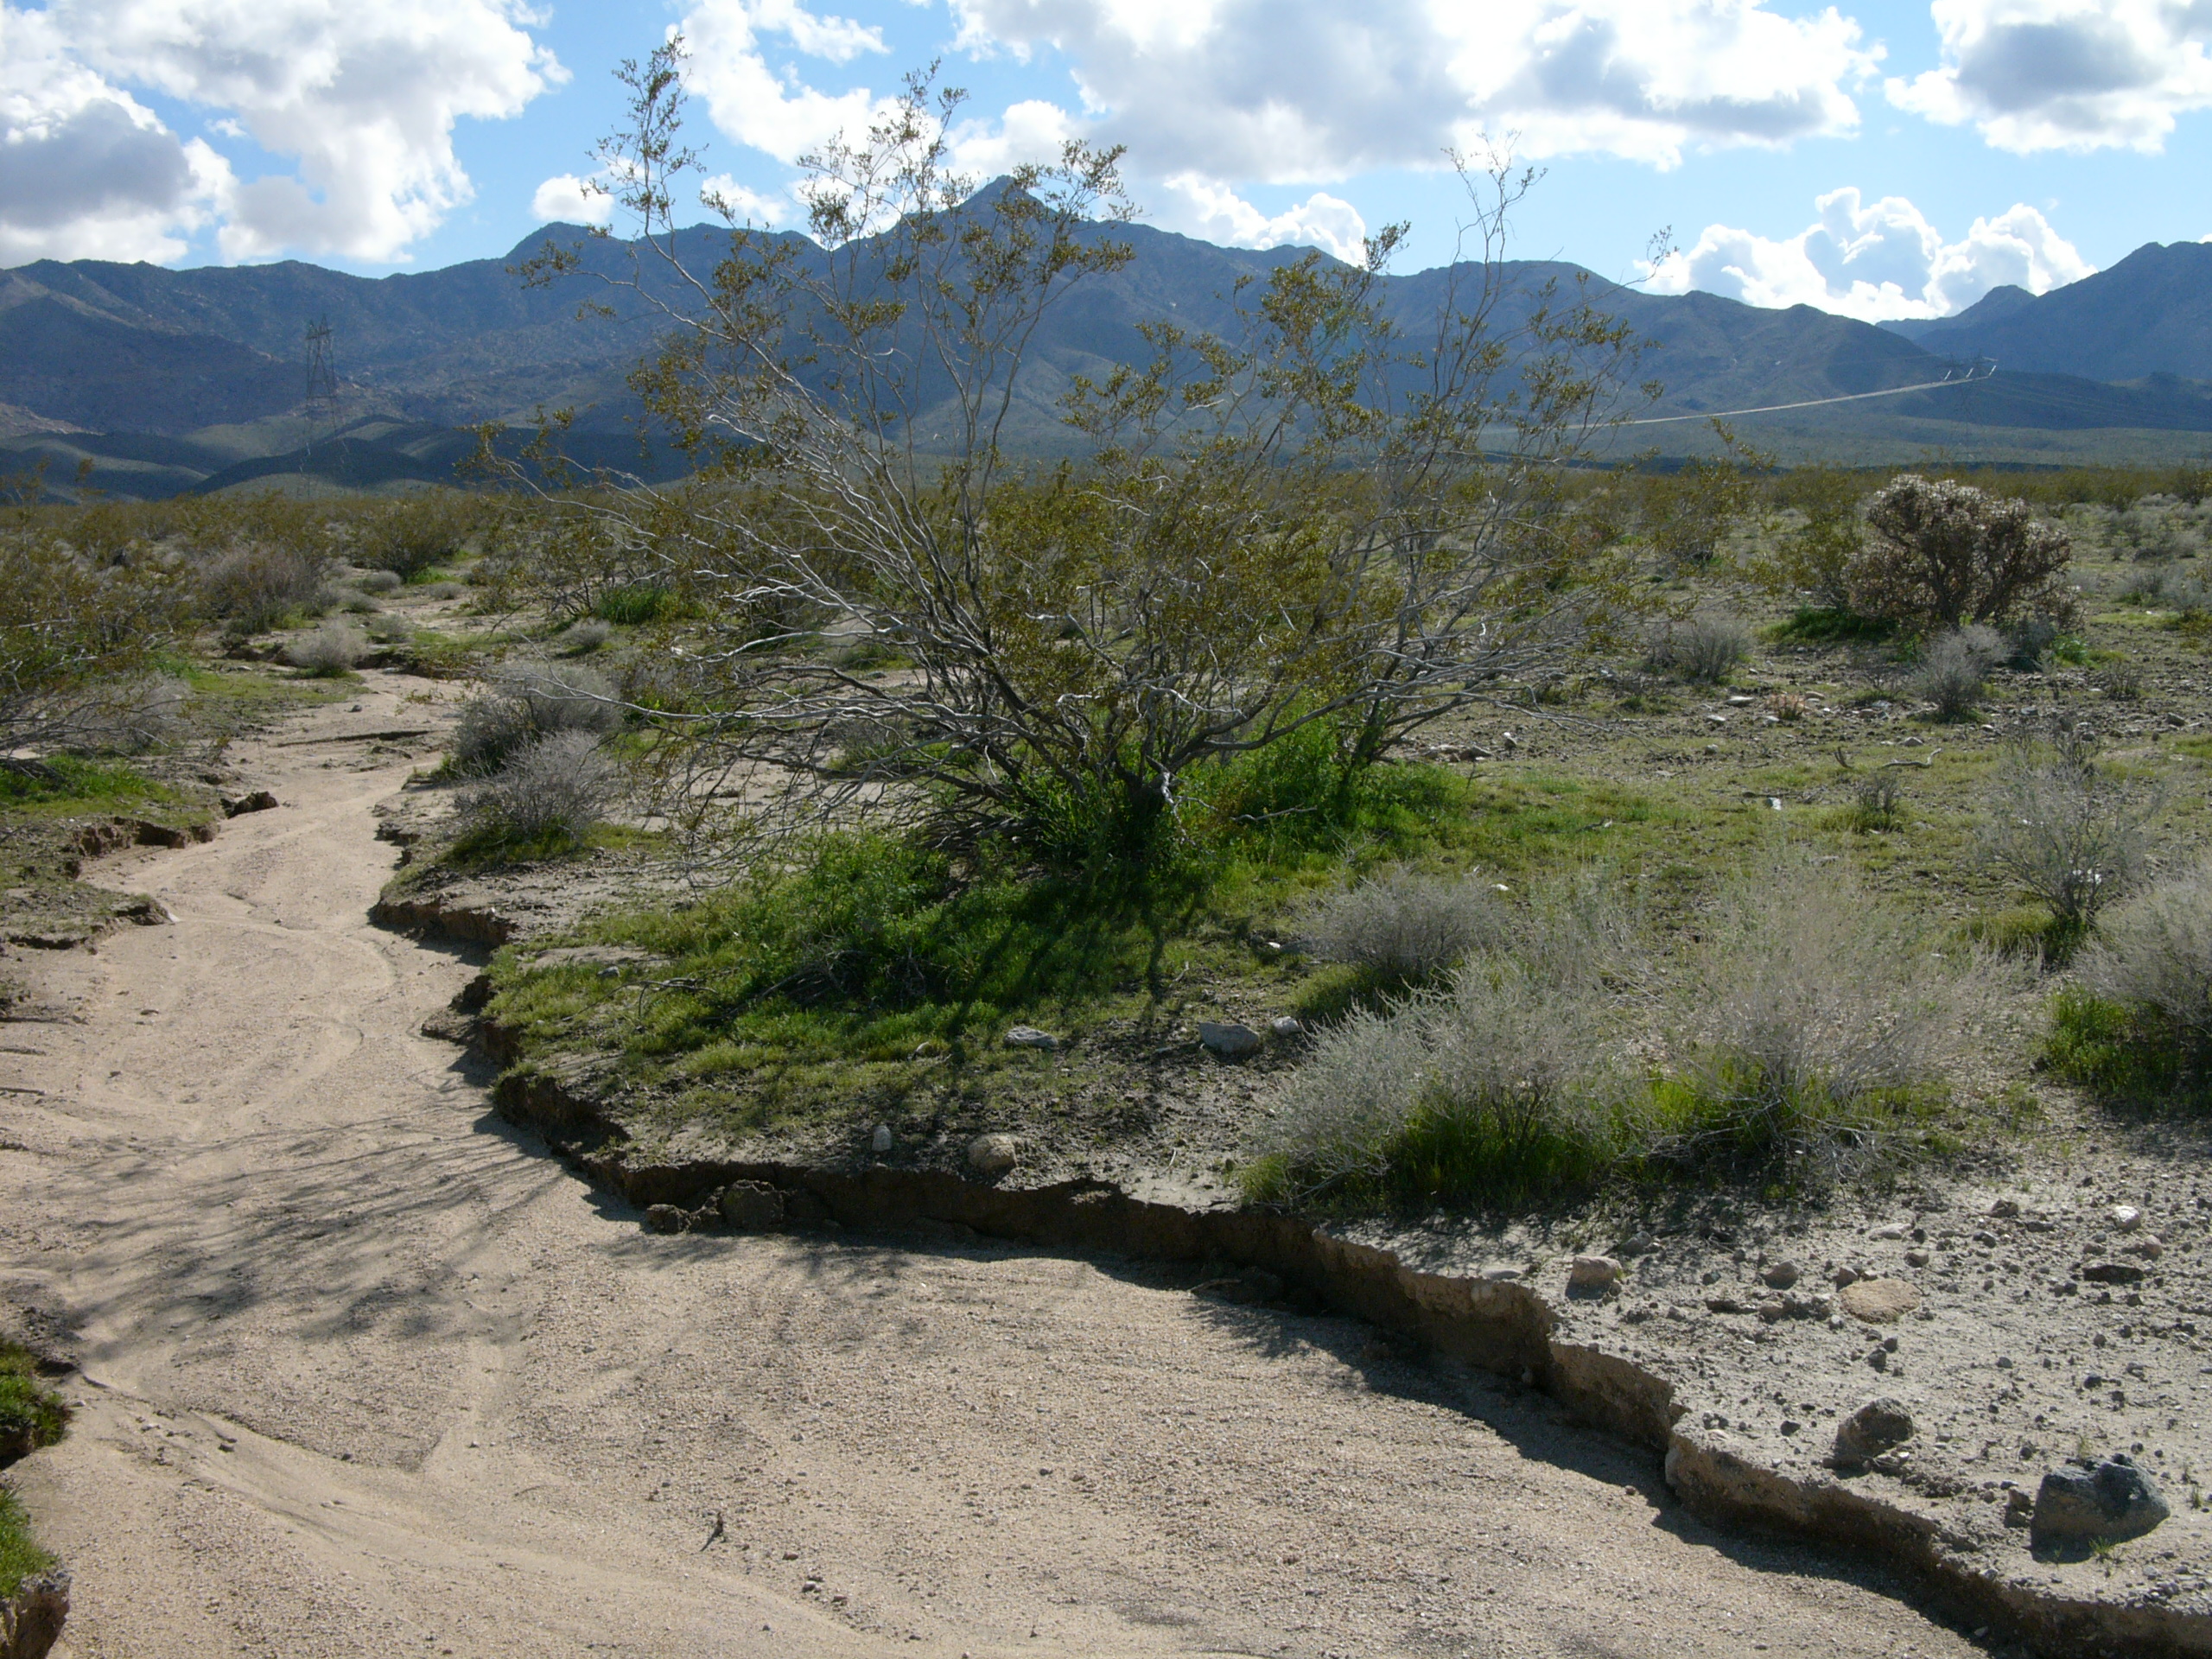 File:Dry river bed in California.jpg - Wikimedia Commons